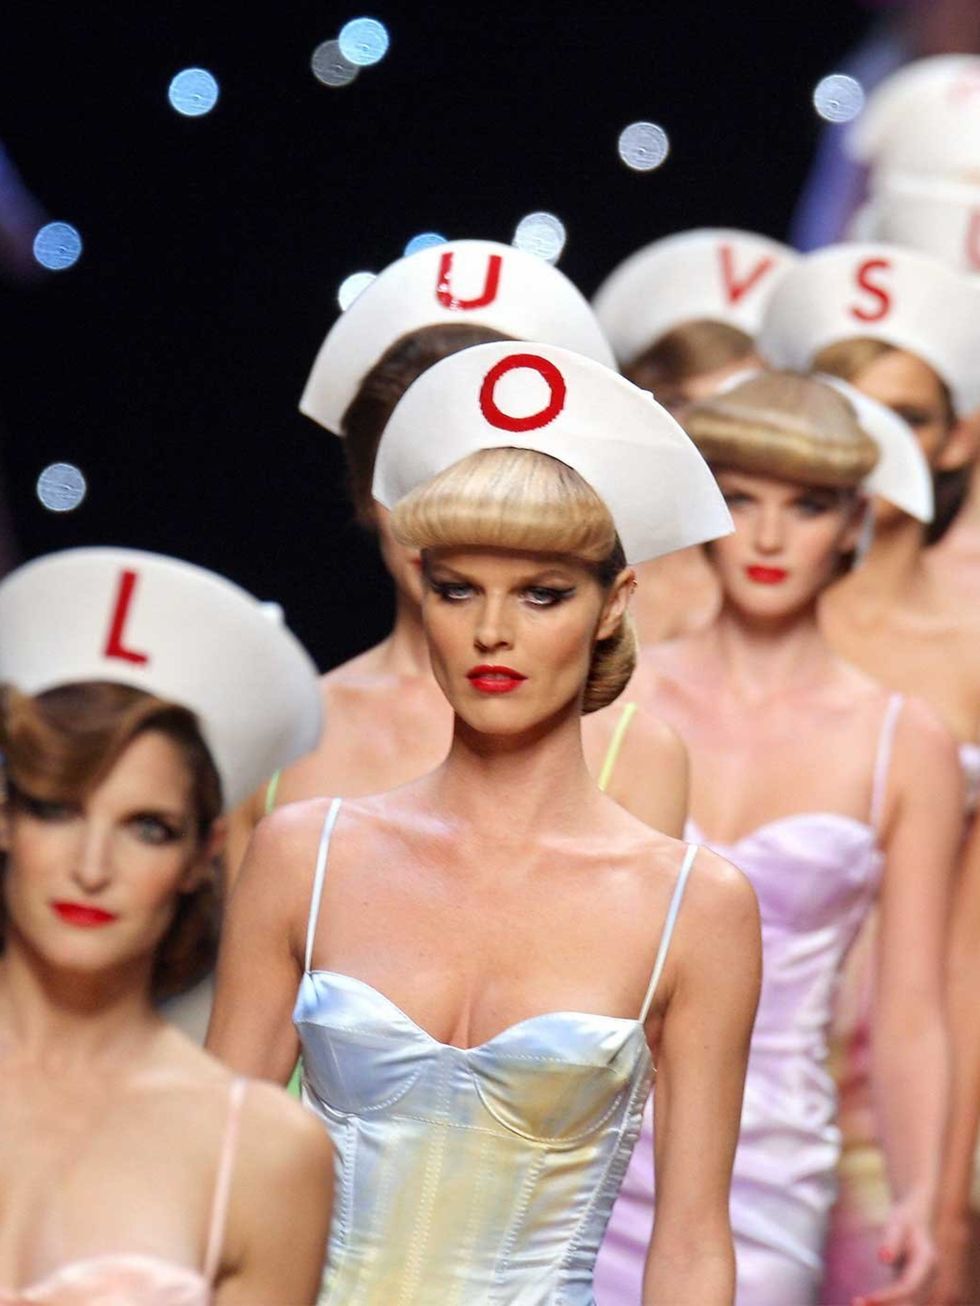 Louis Vuitton Spring 2008 Ready-to-Wear Collection